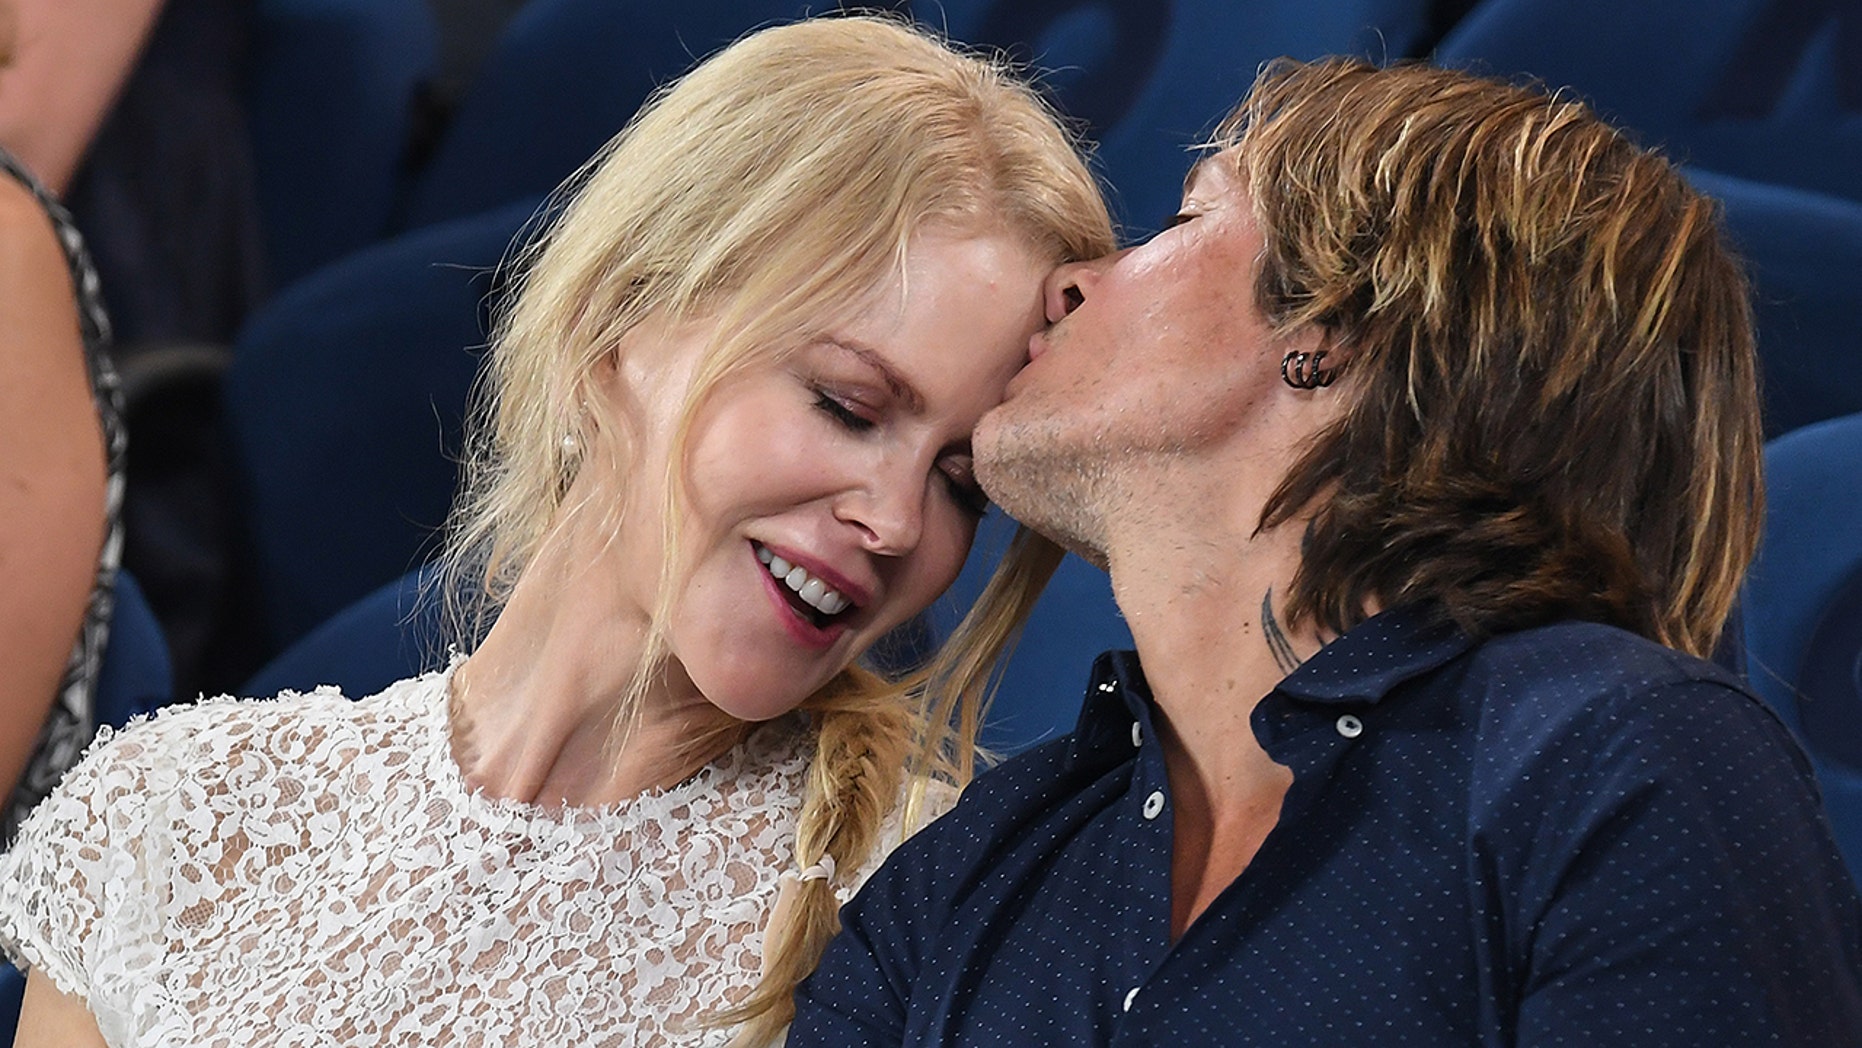 Nicole Kidman and Keith Urban look as in love as ever at Australian Open